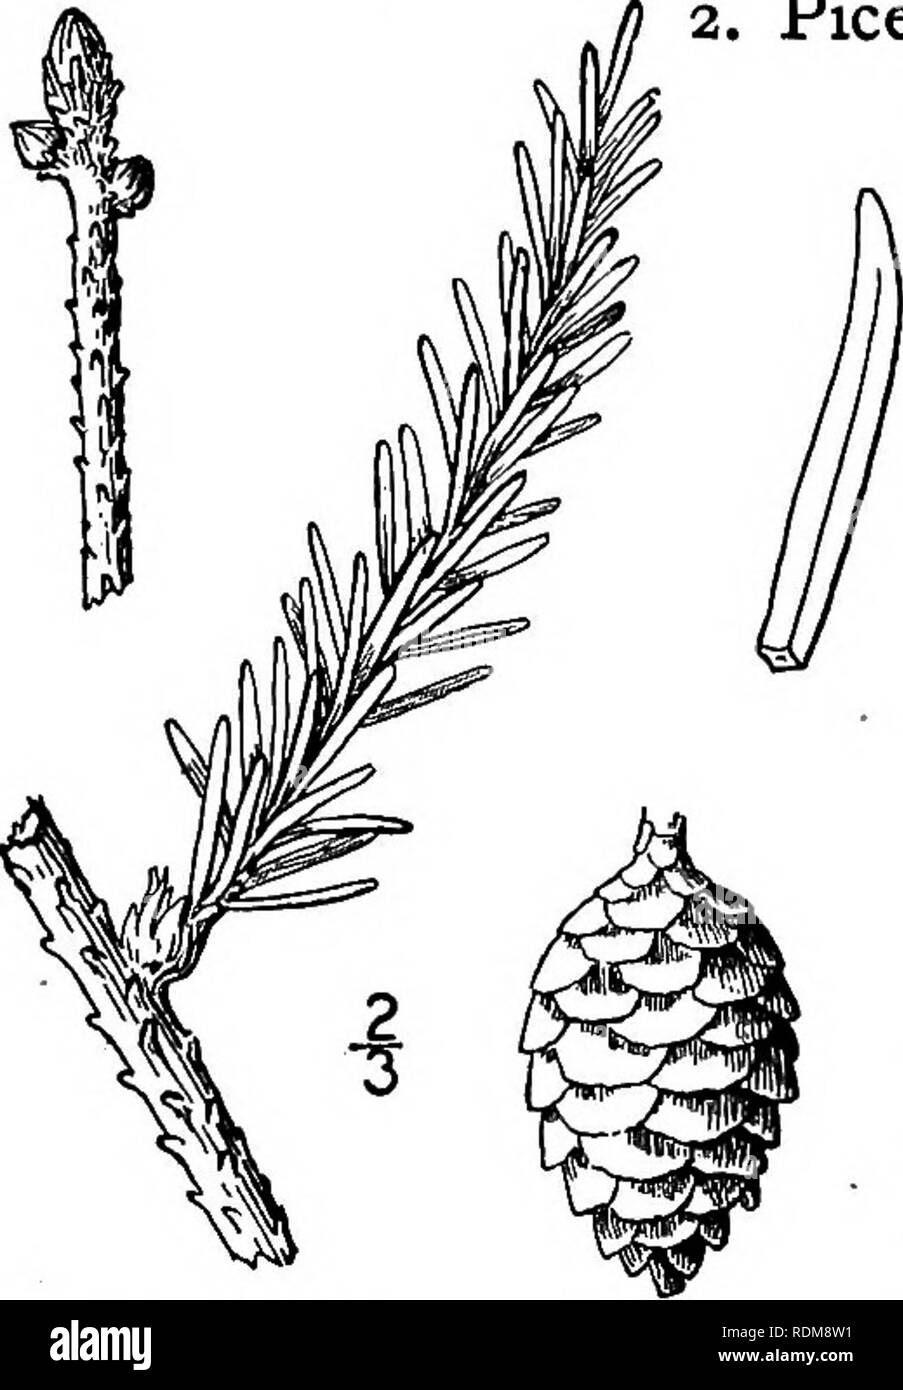 . An illustrated flora of the northern United States, Canada and the British possessions, from Newfoundland to the parallel of the southern boundary of Virginia, and from the Atlantic Ocean westward to the 102d meridian. Botany; Botany. 2. Picea mariana (Mill.) B.S.P. Black Spruce. Fig. 144. Abies mariana Mill. Gard. Diet. Ed. 8, No. 5. 1768. Pinus nigra Ait. Hort Kew. 3: 370. 1789. Abies nigra Desf. Hist. Arb. 2: 580. 1809. Picea nigra Link, Linnaea, 15 : 520. 1841. Picea mariana B.S.P. Prel. Cat. N. Y. 71, 1888. Picea brevifolia Peck, Spruces of the Adirondacks 13. 1897. A slender tree, some Stock Photo